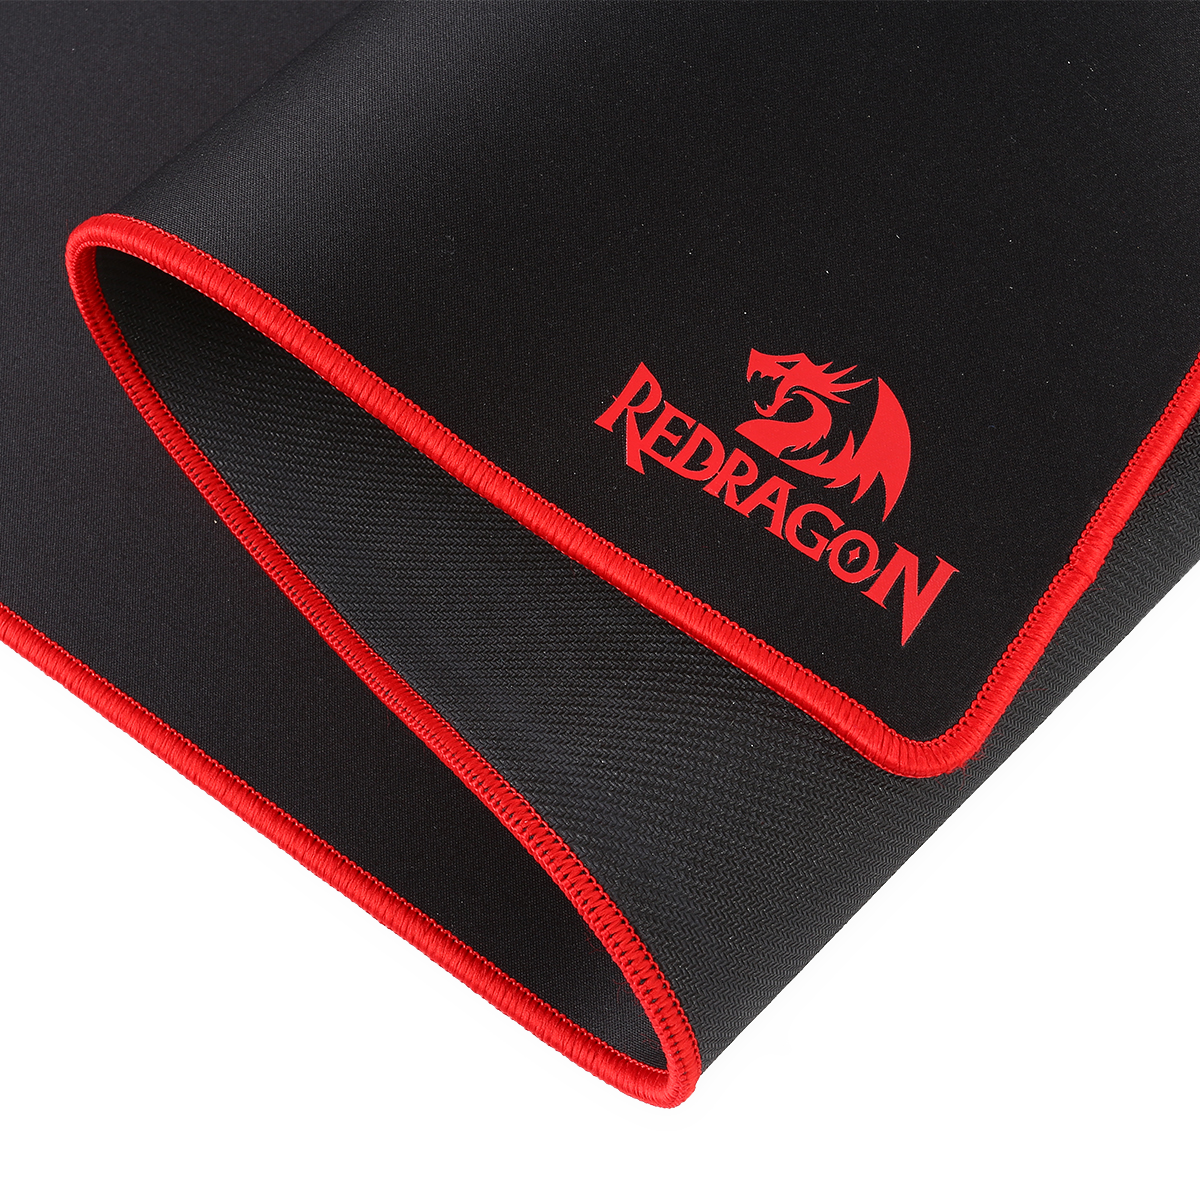 Redragon Gaming Mouse Pad Waterproof Mouse Pad with Non-Slip Rubber Base 80 x 30 cm